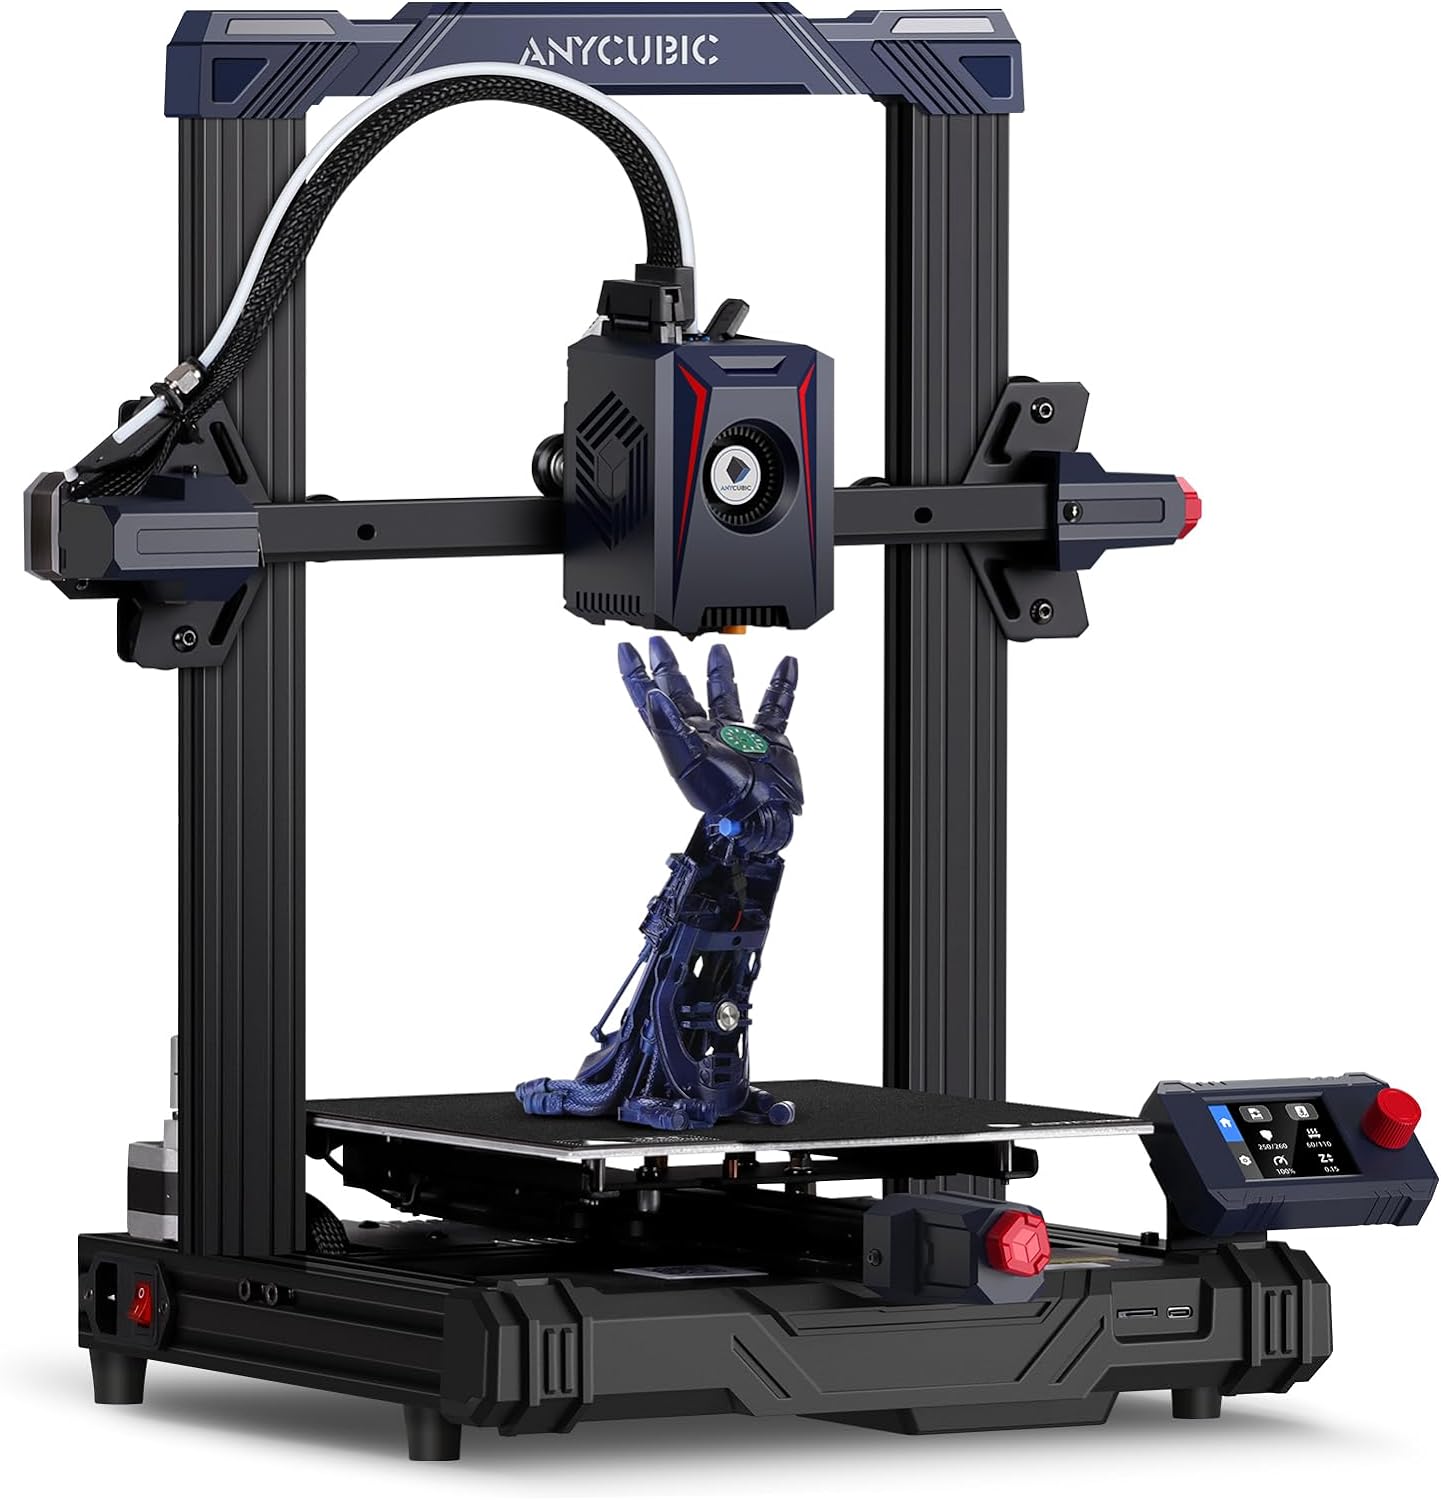 anycubic-kobra-2-neo-3d-printer-upgraded-250mms-faster-printing-speed-with-new-integrated-extruder-details-even-better-l Anycubic Kobra 2 Neo 3D Printer Review